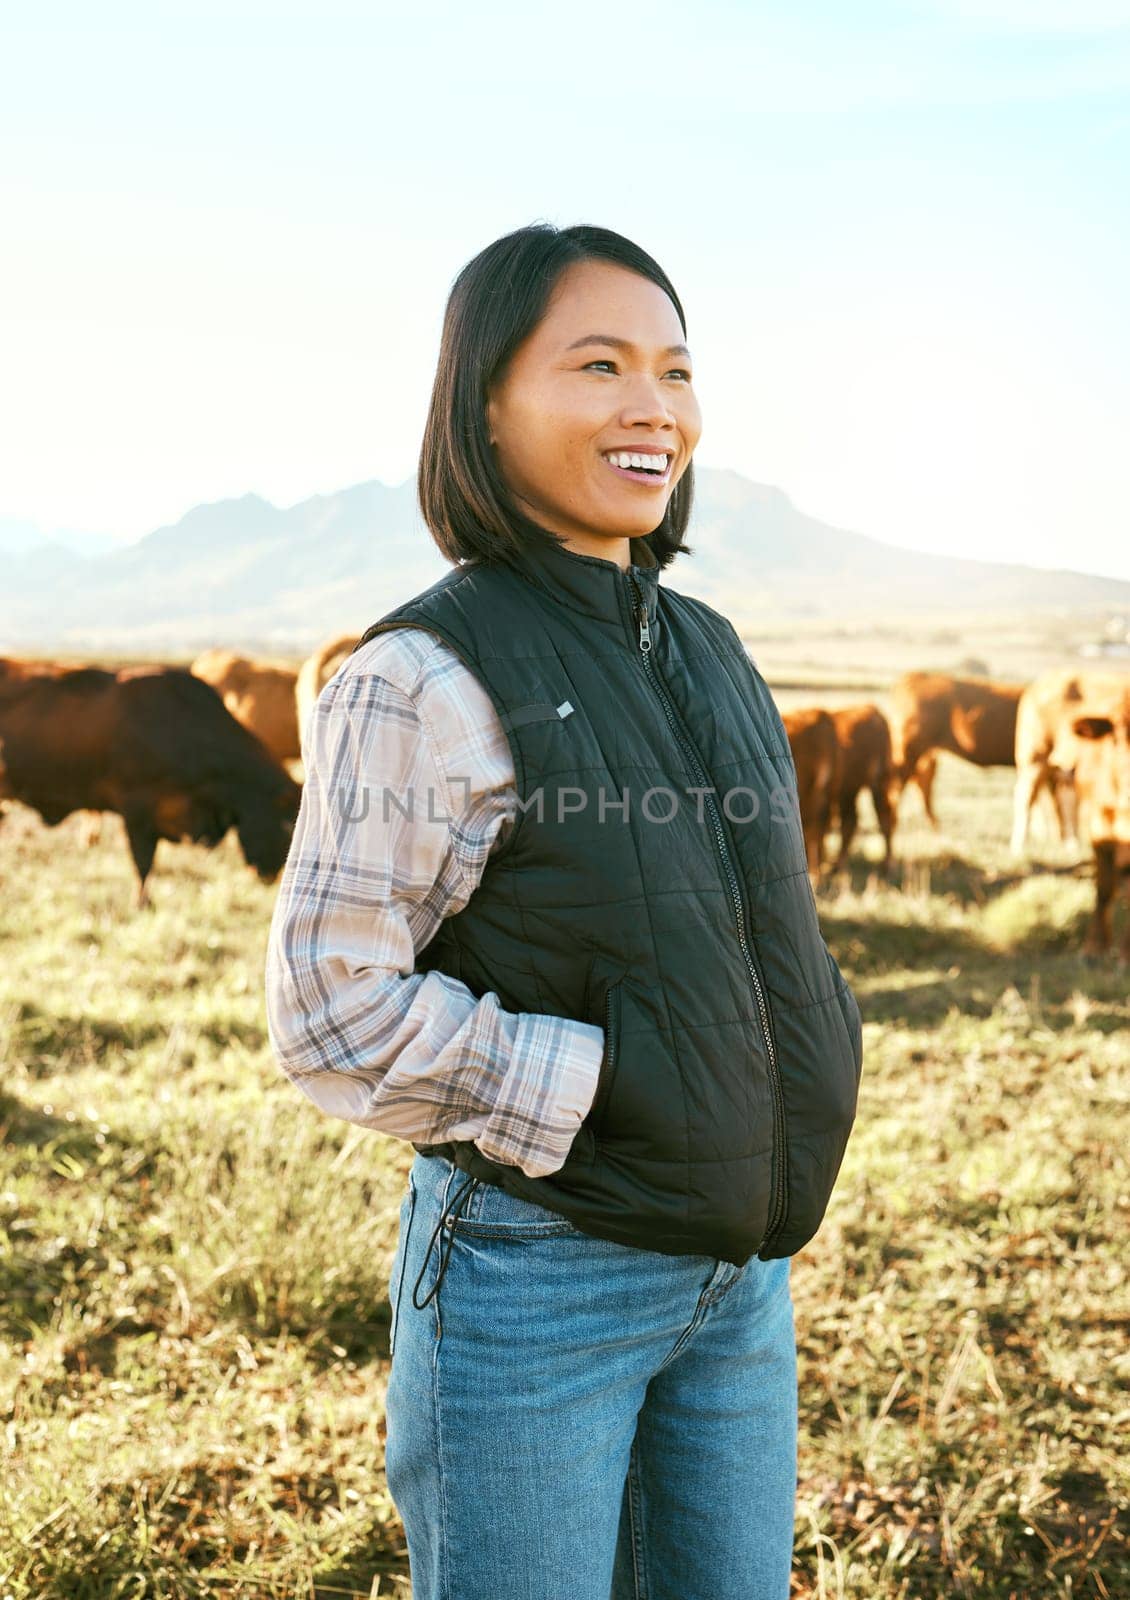 Cow, farmer and asian woman on grass field in nature for meat, beef or cattle food industry. Happy, smile and farming success for cows, livestock and agriculture animals, milk production and growth.